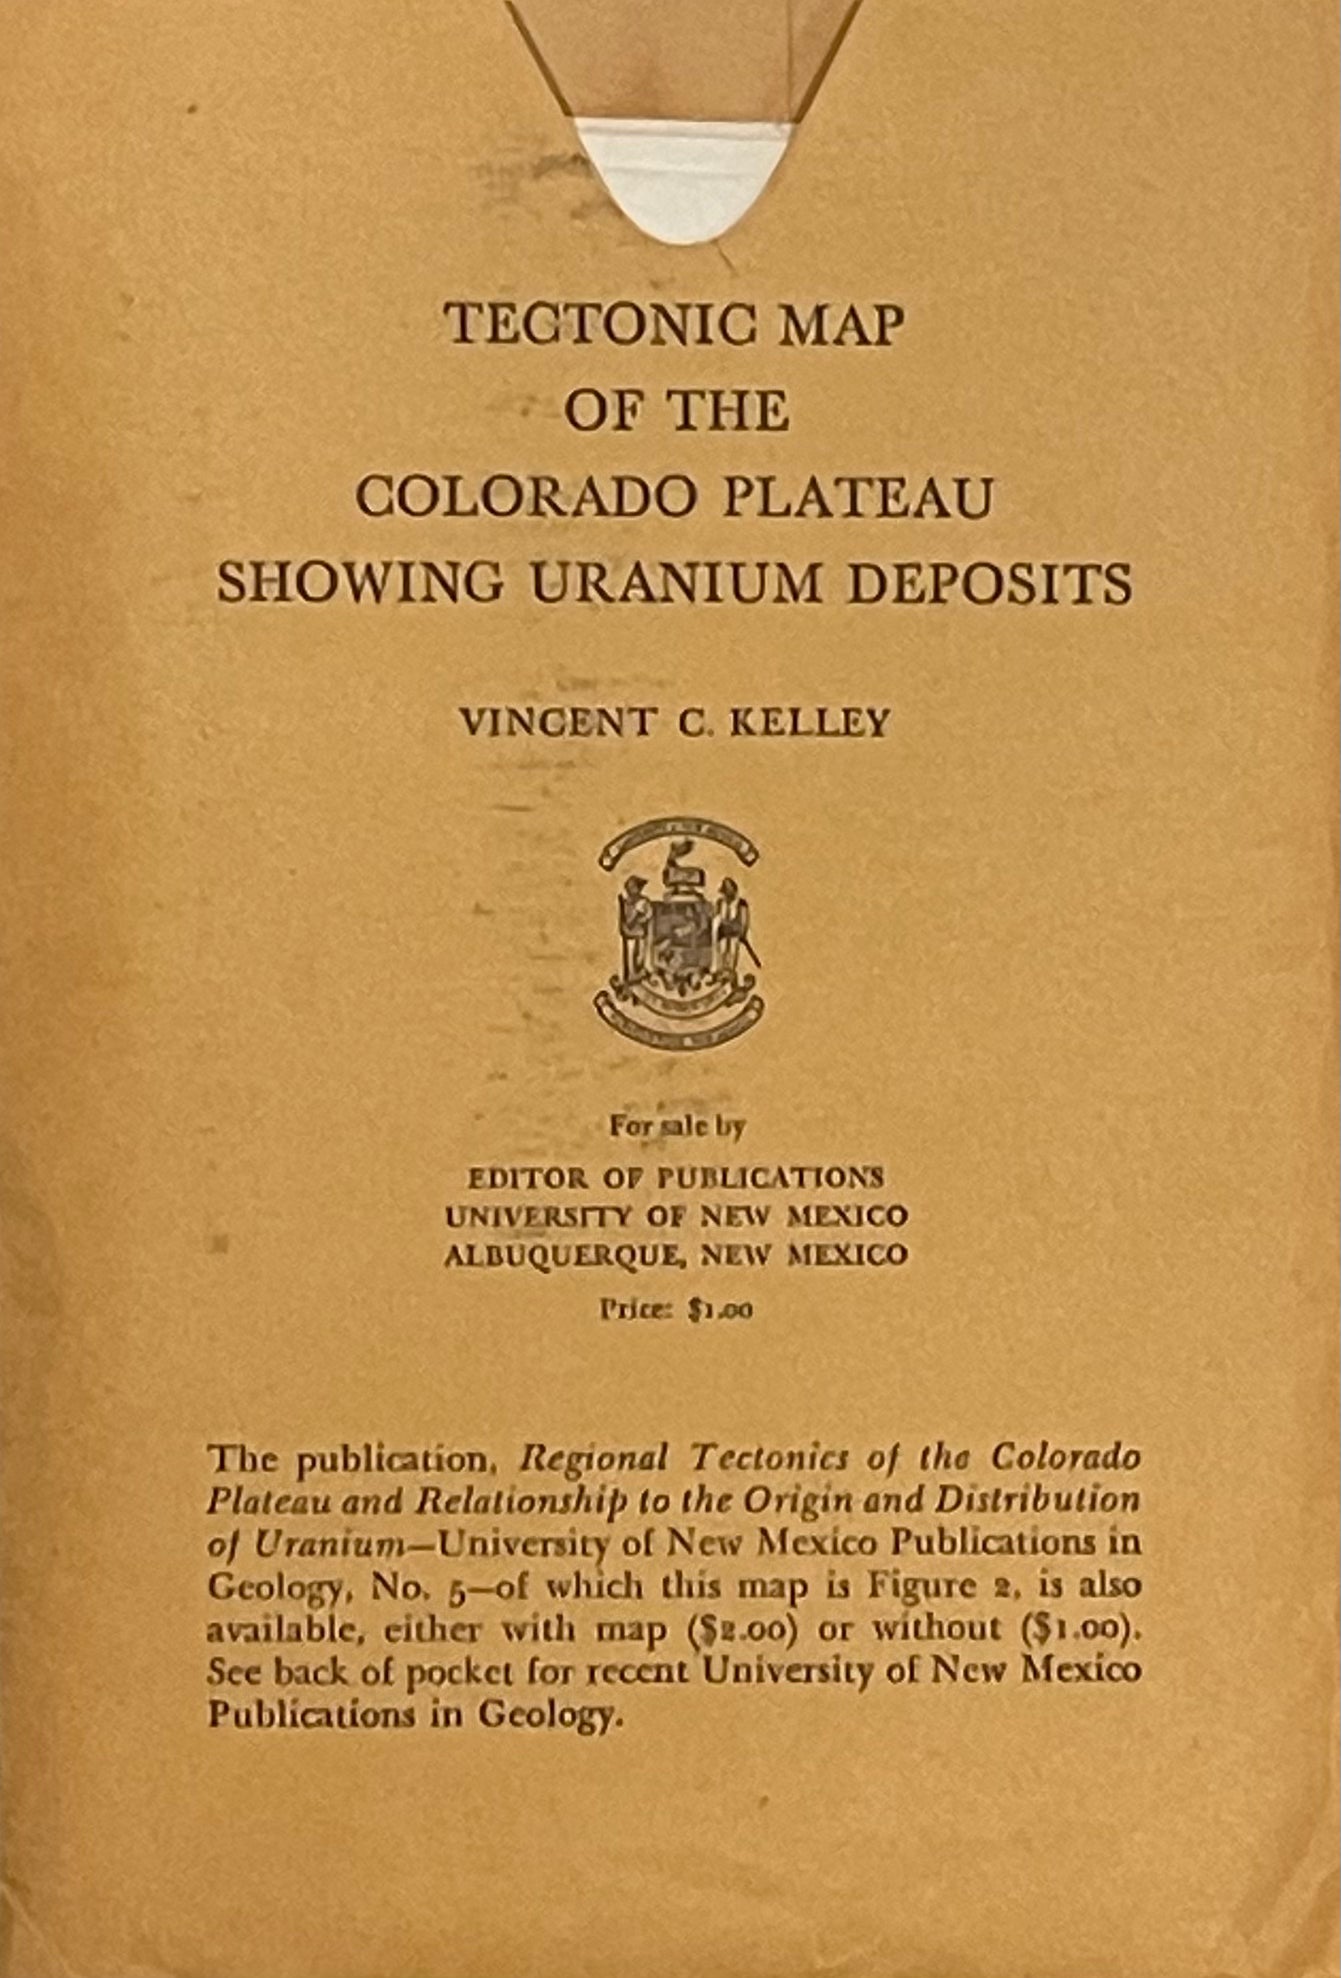 Tectonic Map of the Colorado Plateau Showing Uranium Deposits by Vincent C. Kelley Published in 1955 by University of New Mexico